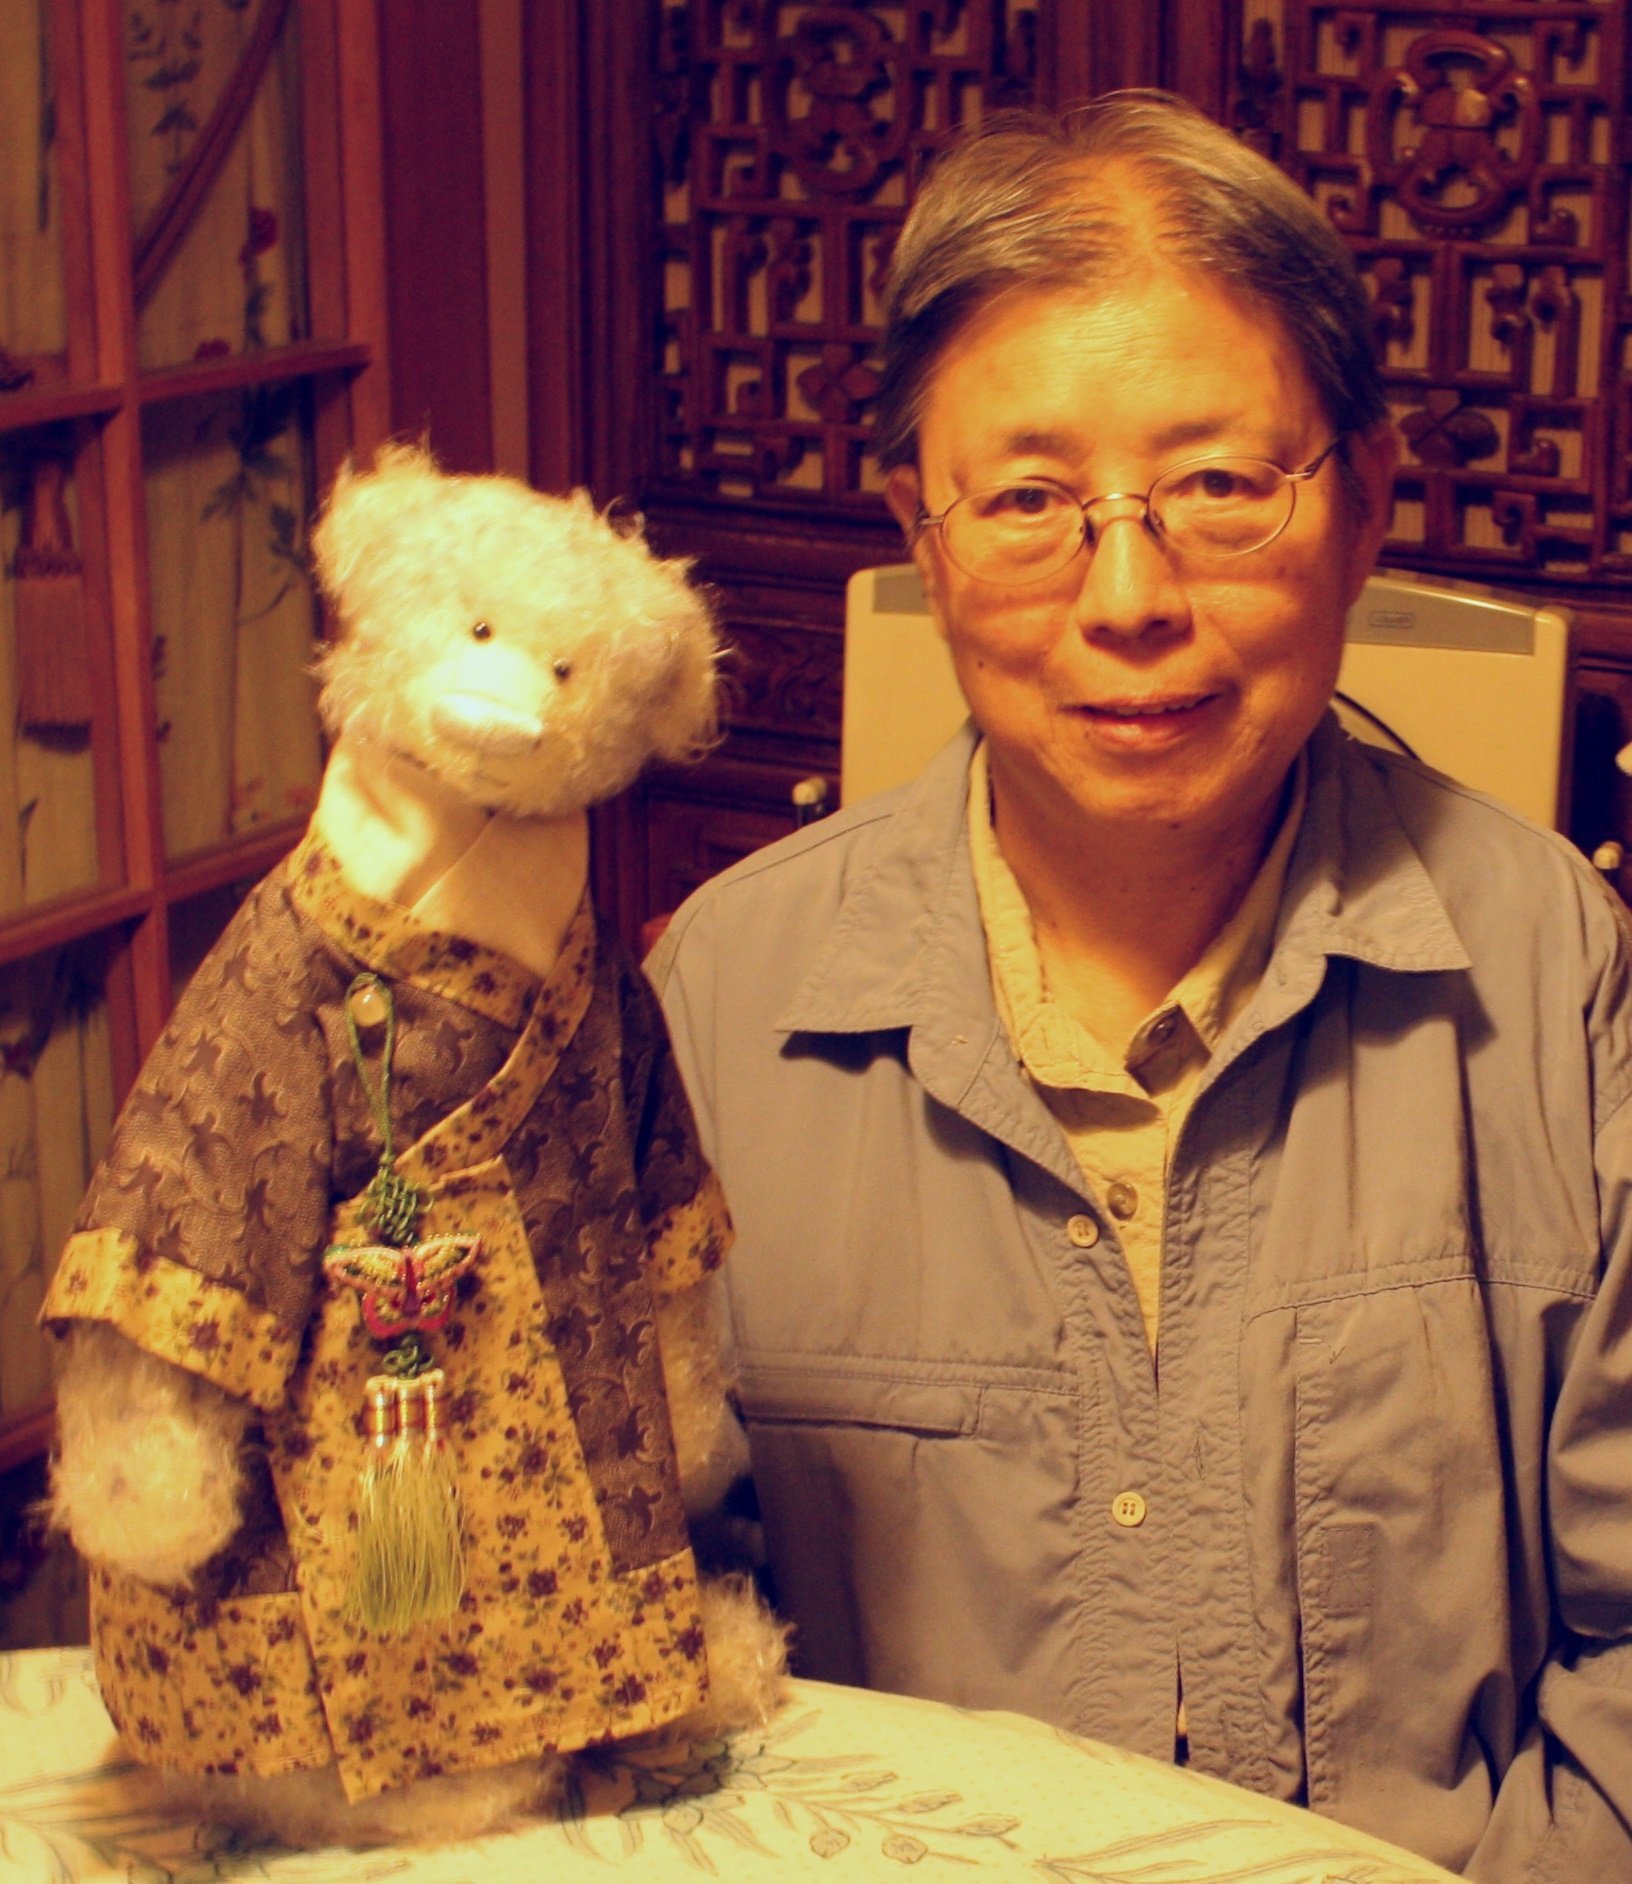 Hong Kong writer Xi Xi began making stuffed toys in 2000 as part of physiotherapy for her right hand. A memorial to the much-loved writer will open in Wan Chai in 2025. Photo: Courtesy of Plain Leaves Workshop